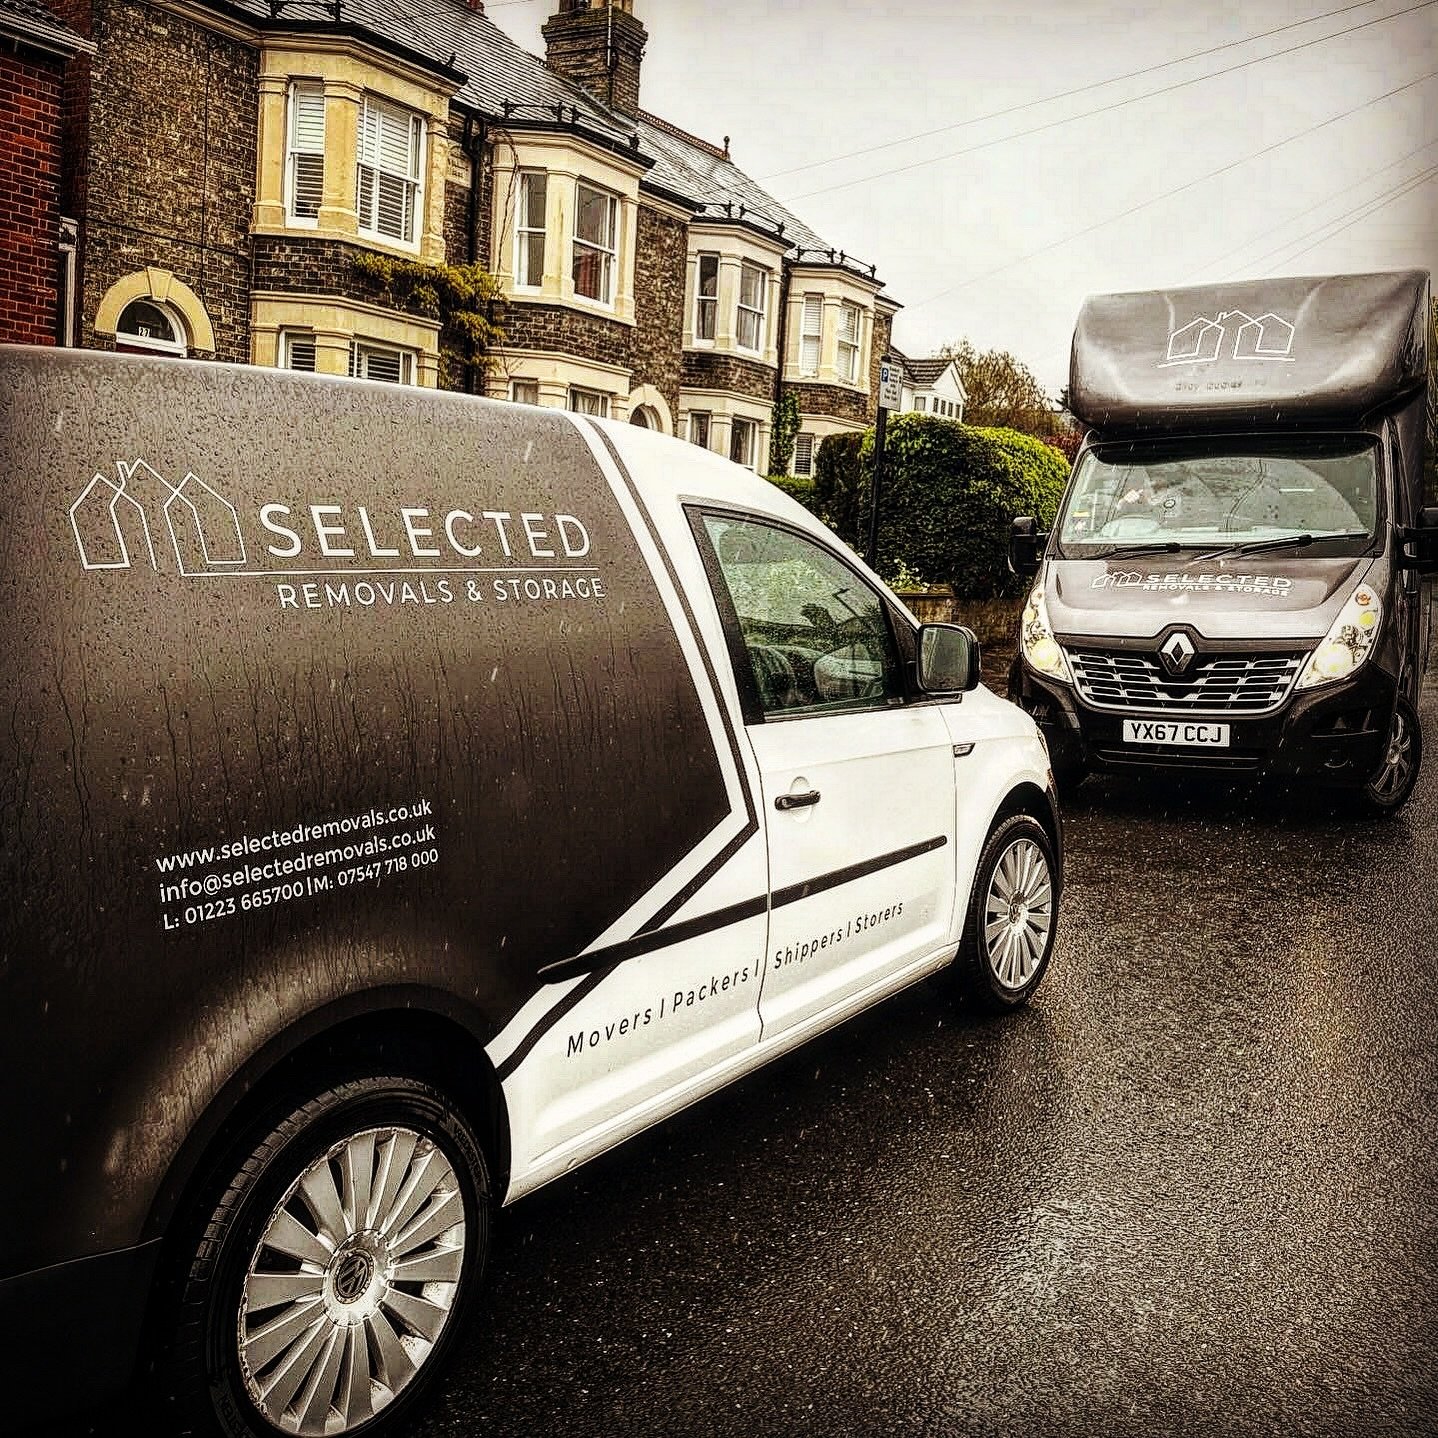 Come rain or shine, we&rsquo;ve got your removal needs (and furniture) covered 🫡🌧️🚚

#cambridge #independentbusiness #independentcambridge #rainyday #removals #movinghome #alwayssmiling #positivevibes